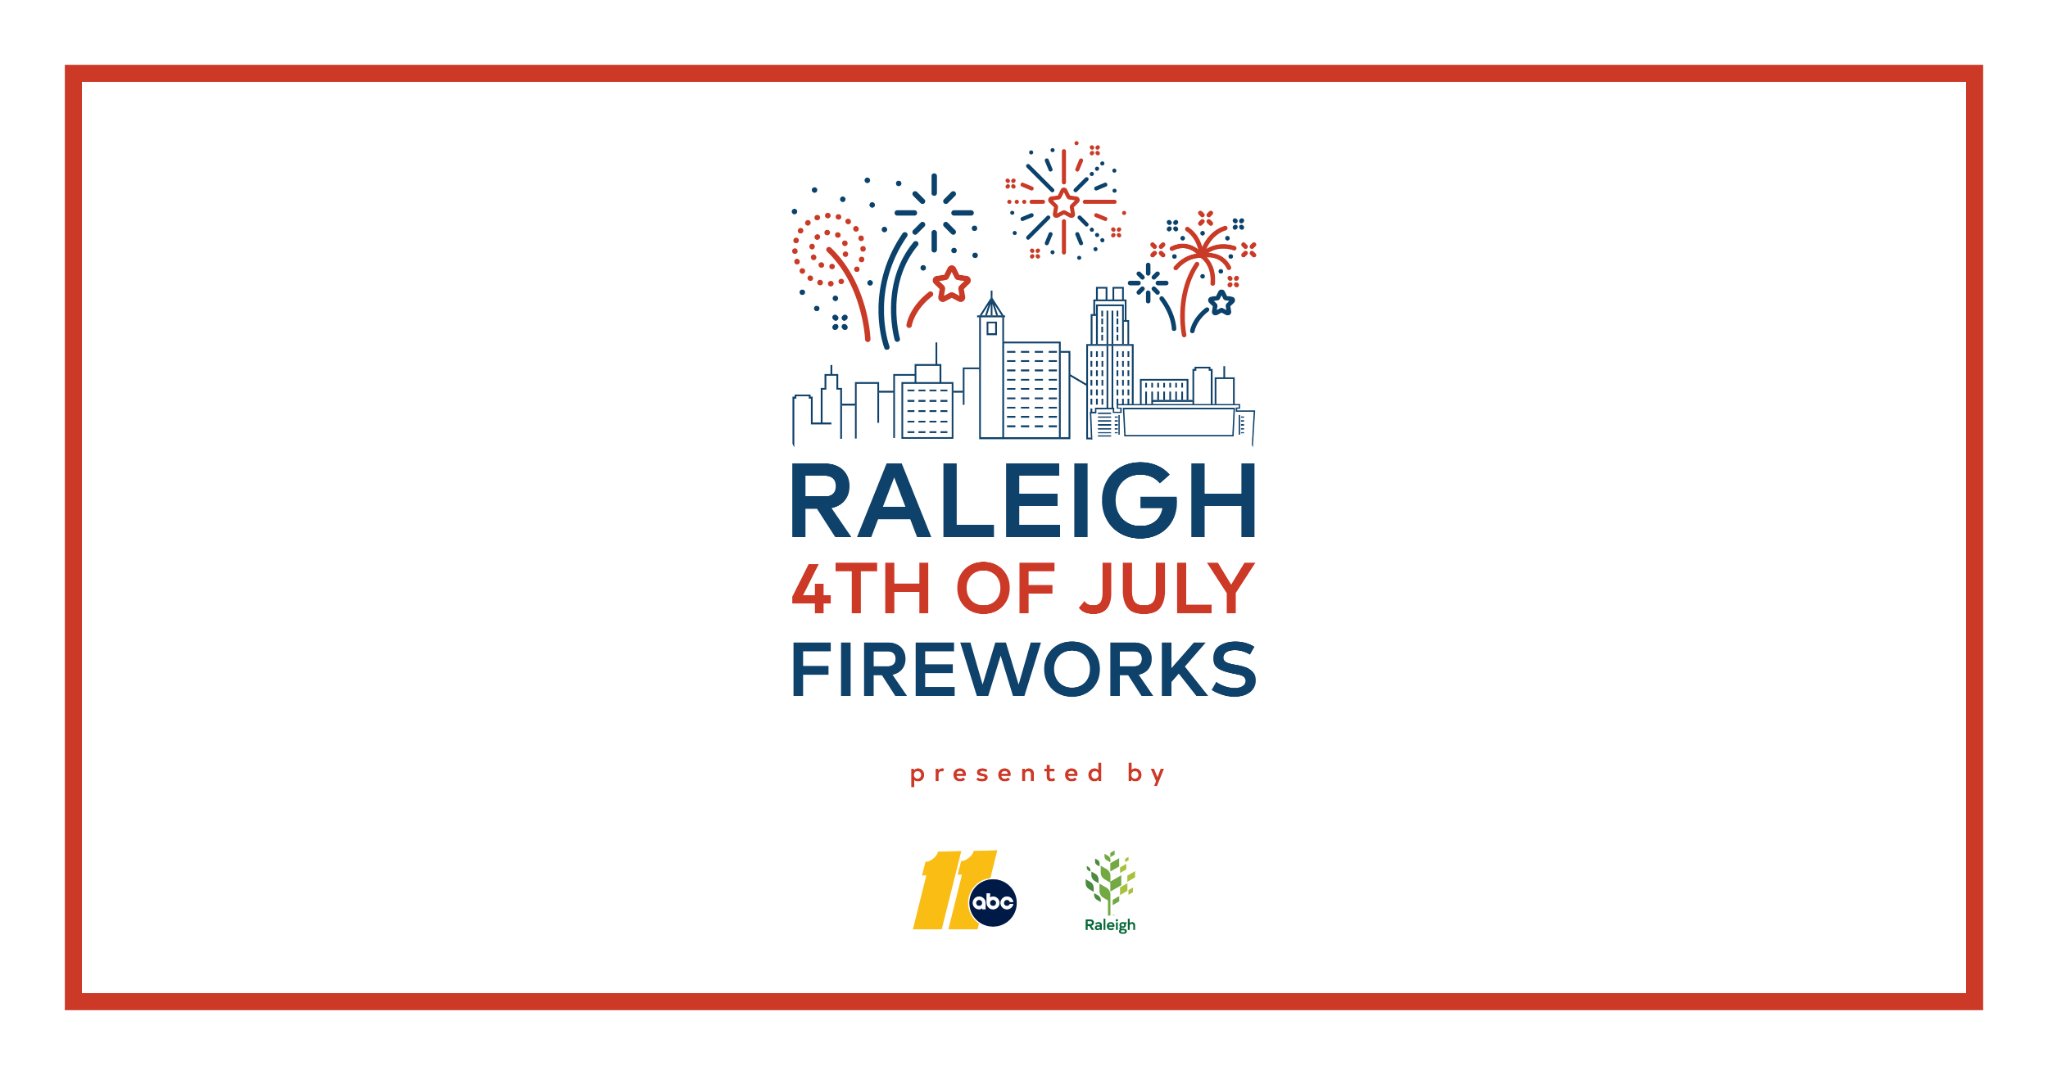 Raleigh 4th of July Fireworks